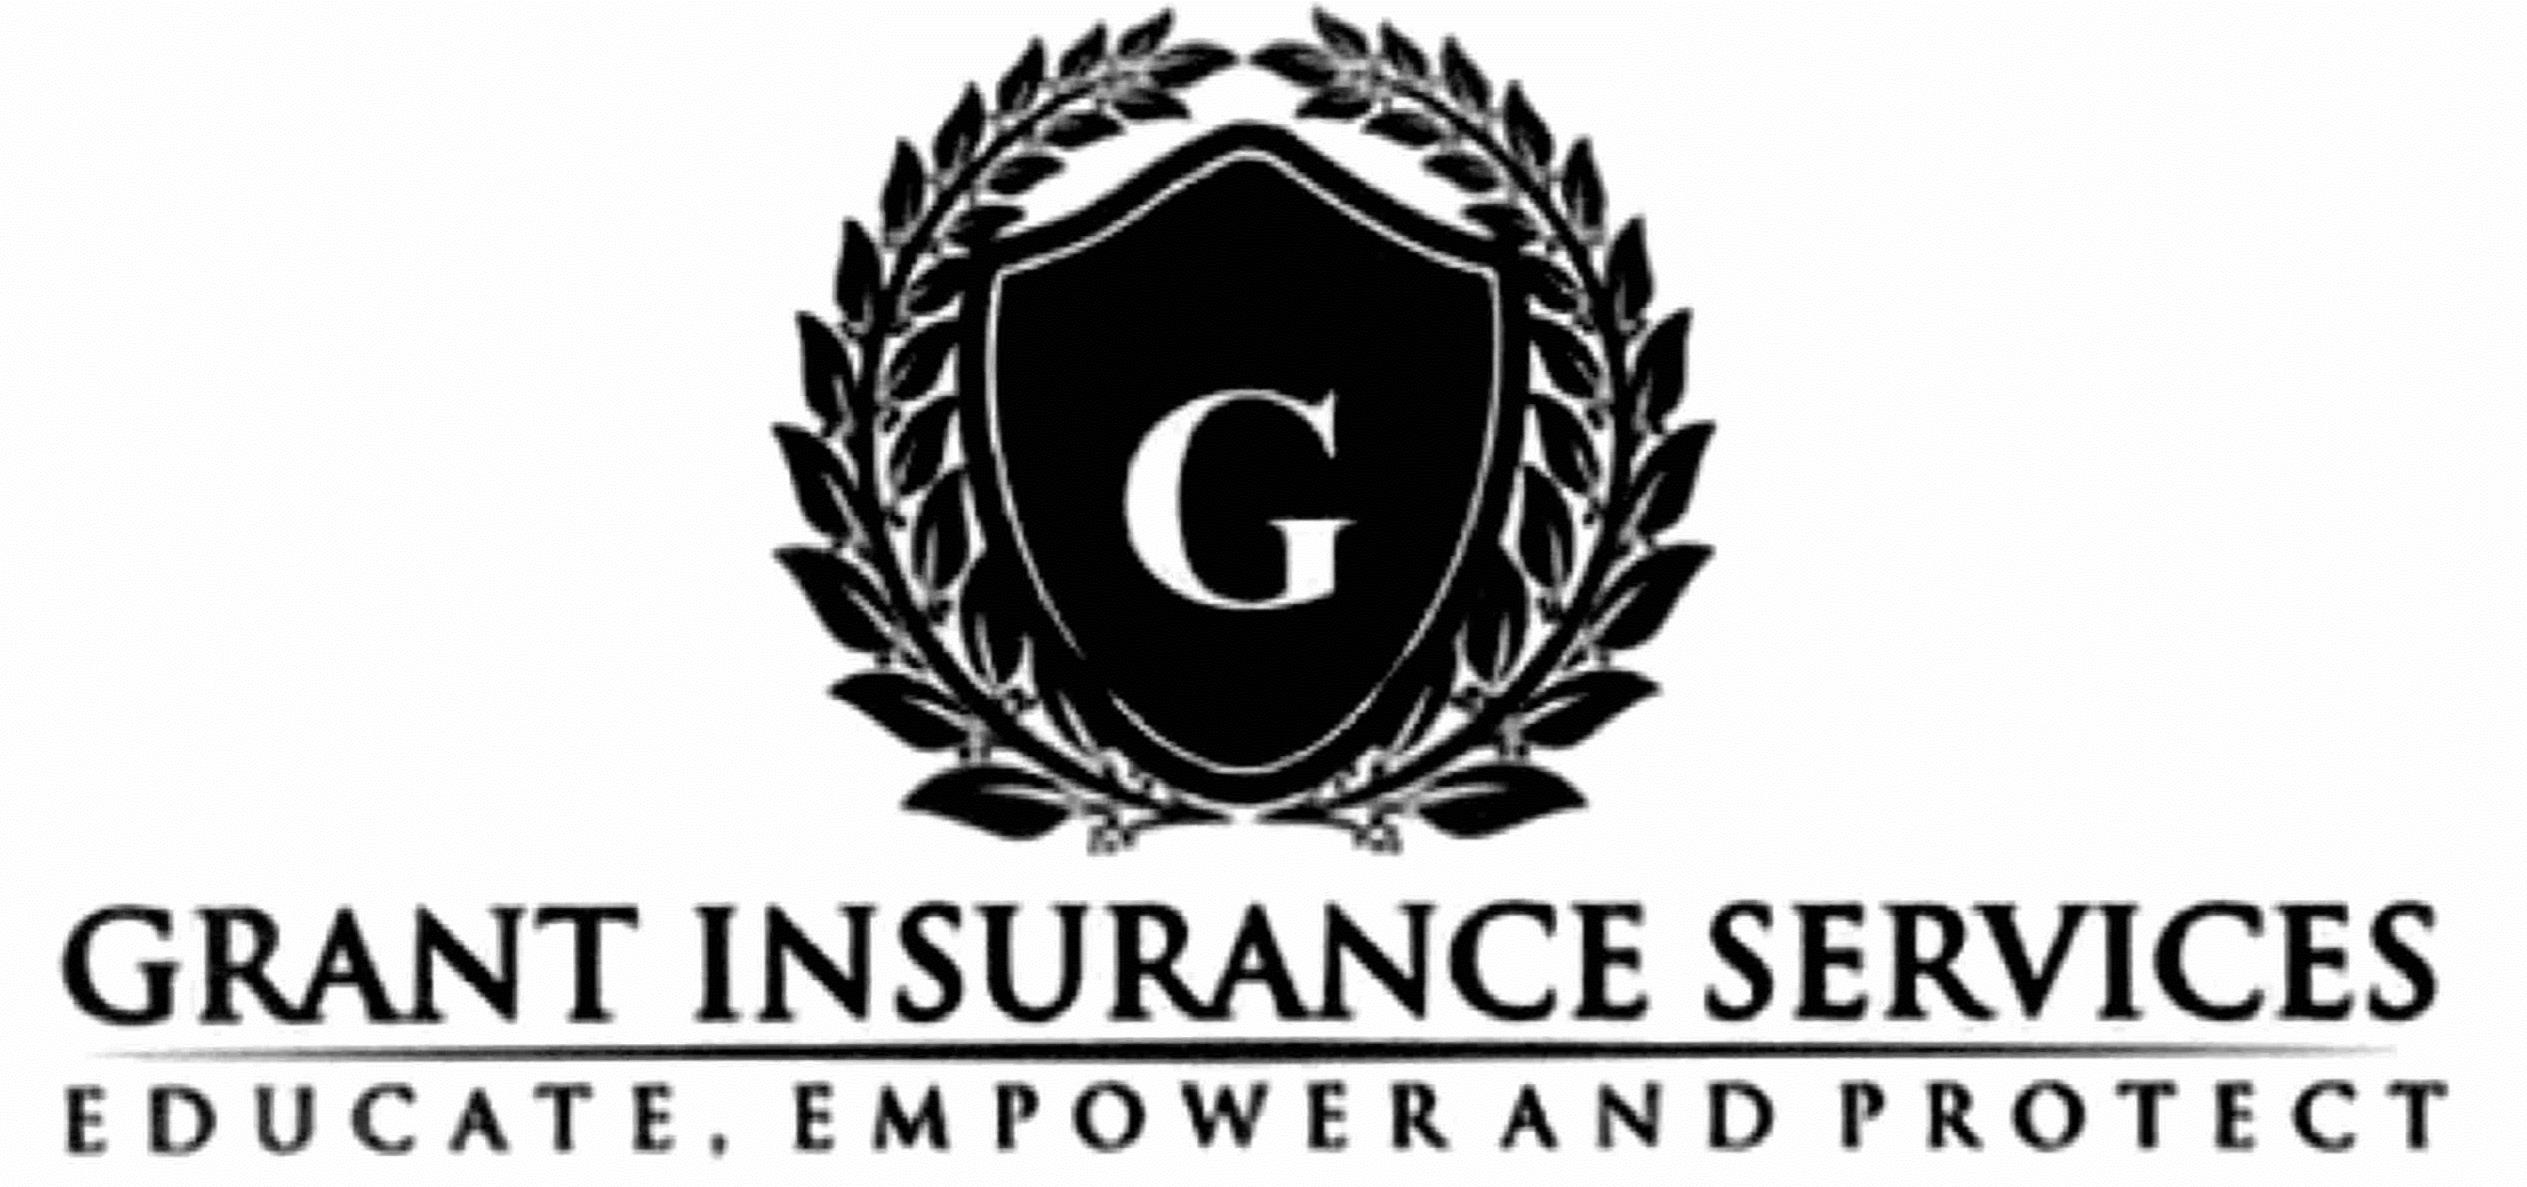  G GRANT INSURANCE SERVICES EDUCATE, EMPOWER AND PROTECT